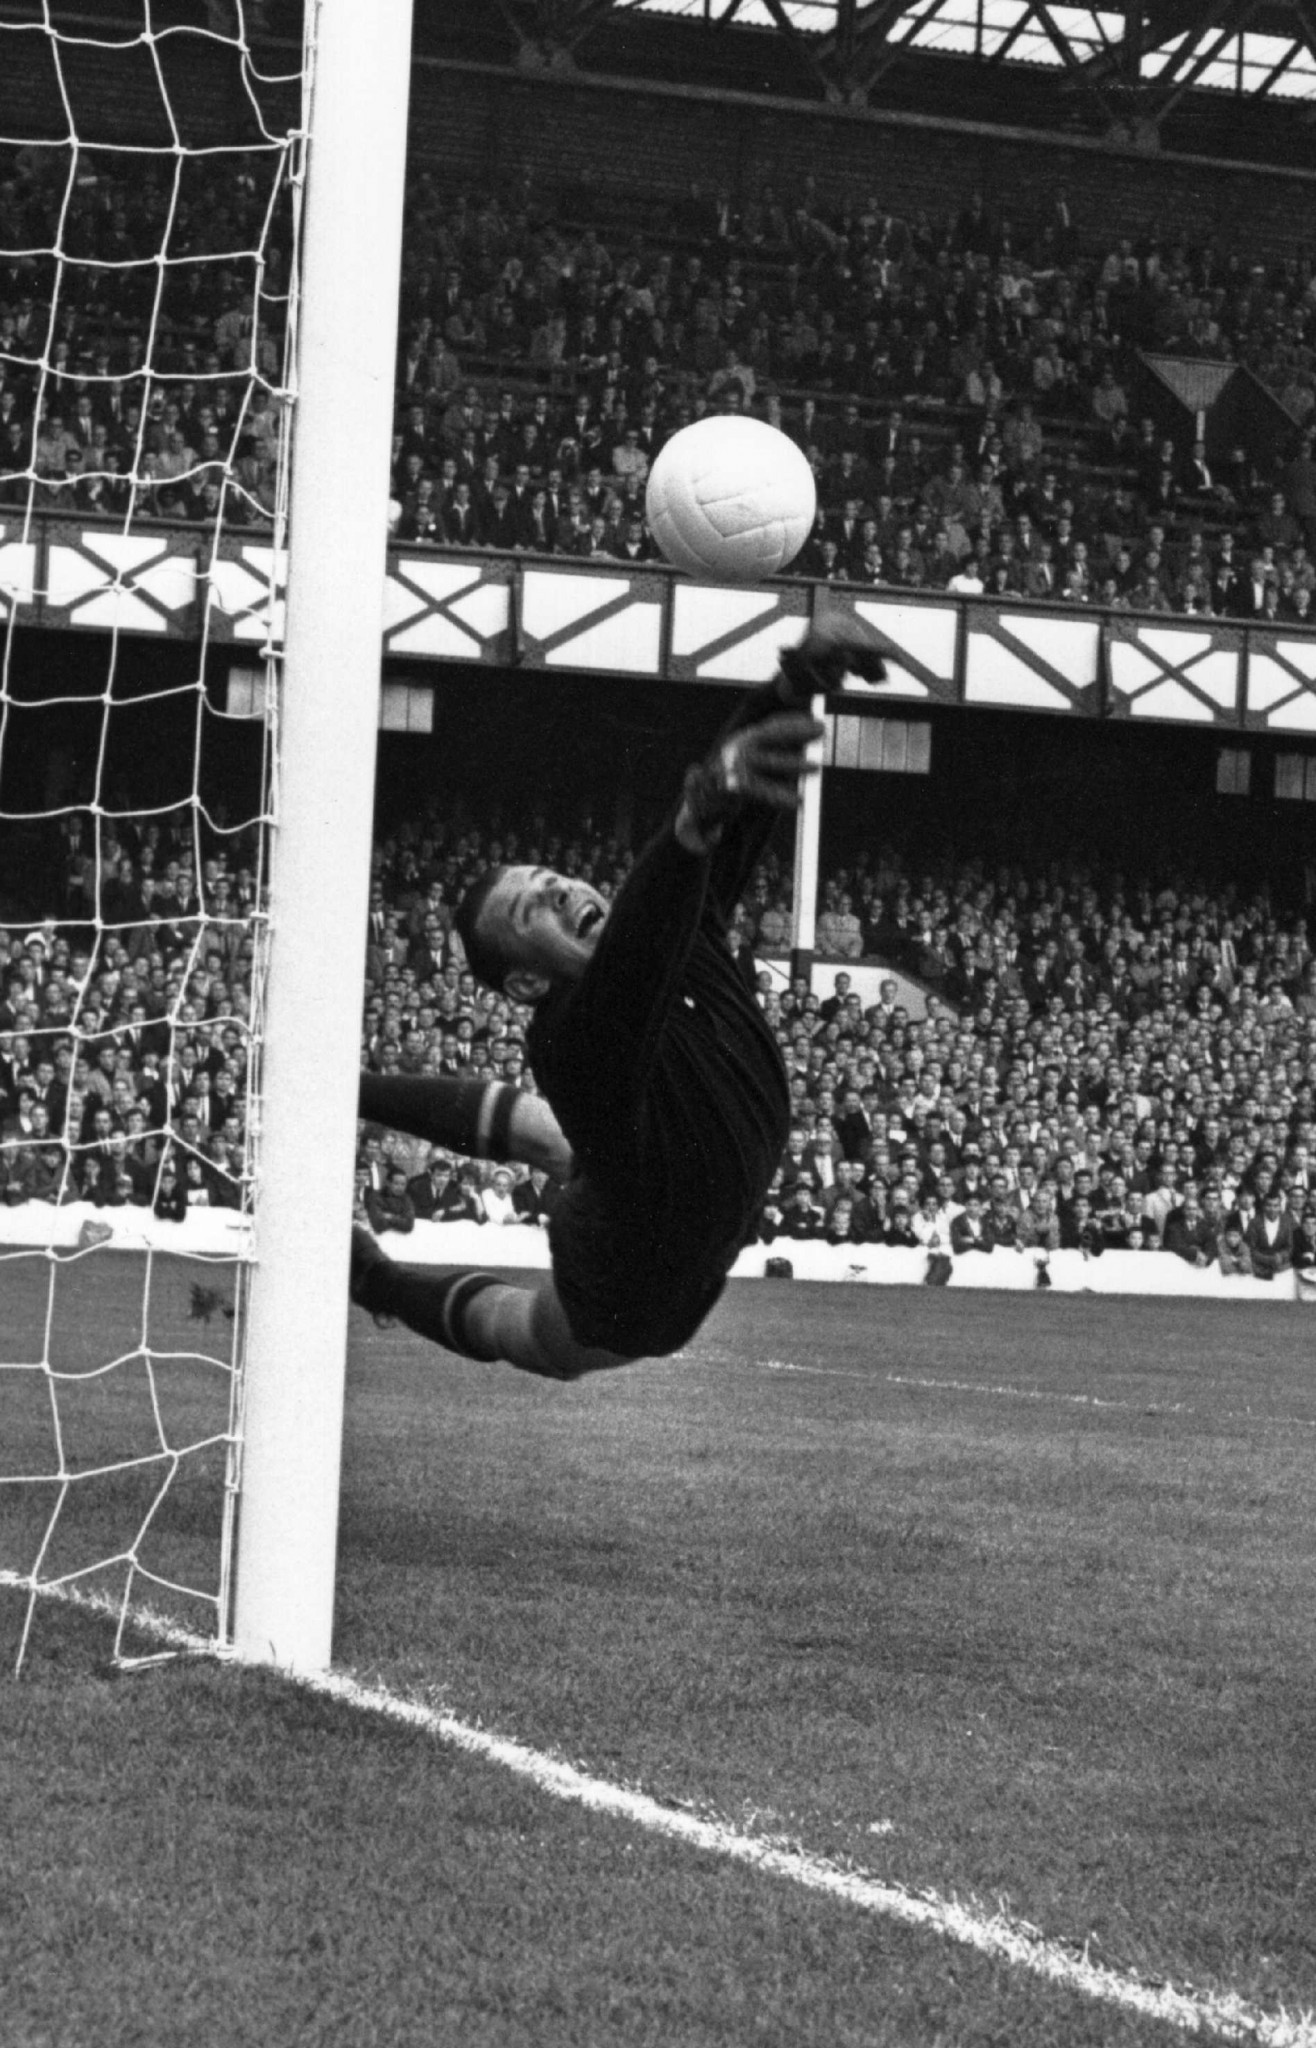 Legendary Soviet Union goalkeeper Lev Yashin is one of several sporting alumni who graduated from the Russian State University of Physical Education, Sport, Youth and Tourism in Moscow ©Getty Images